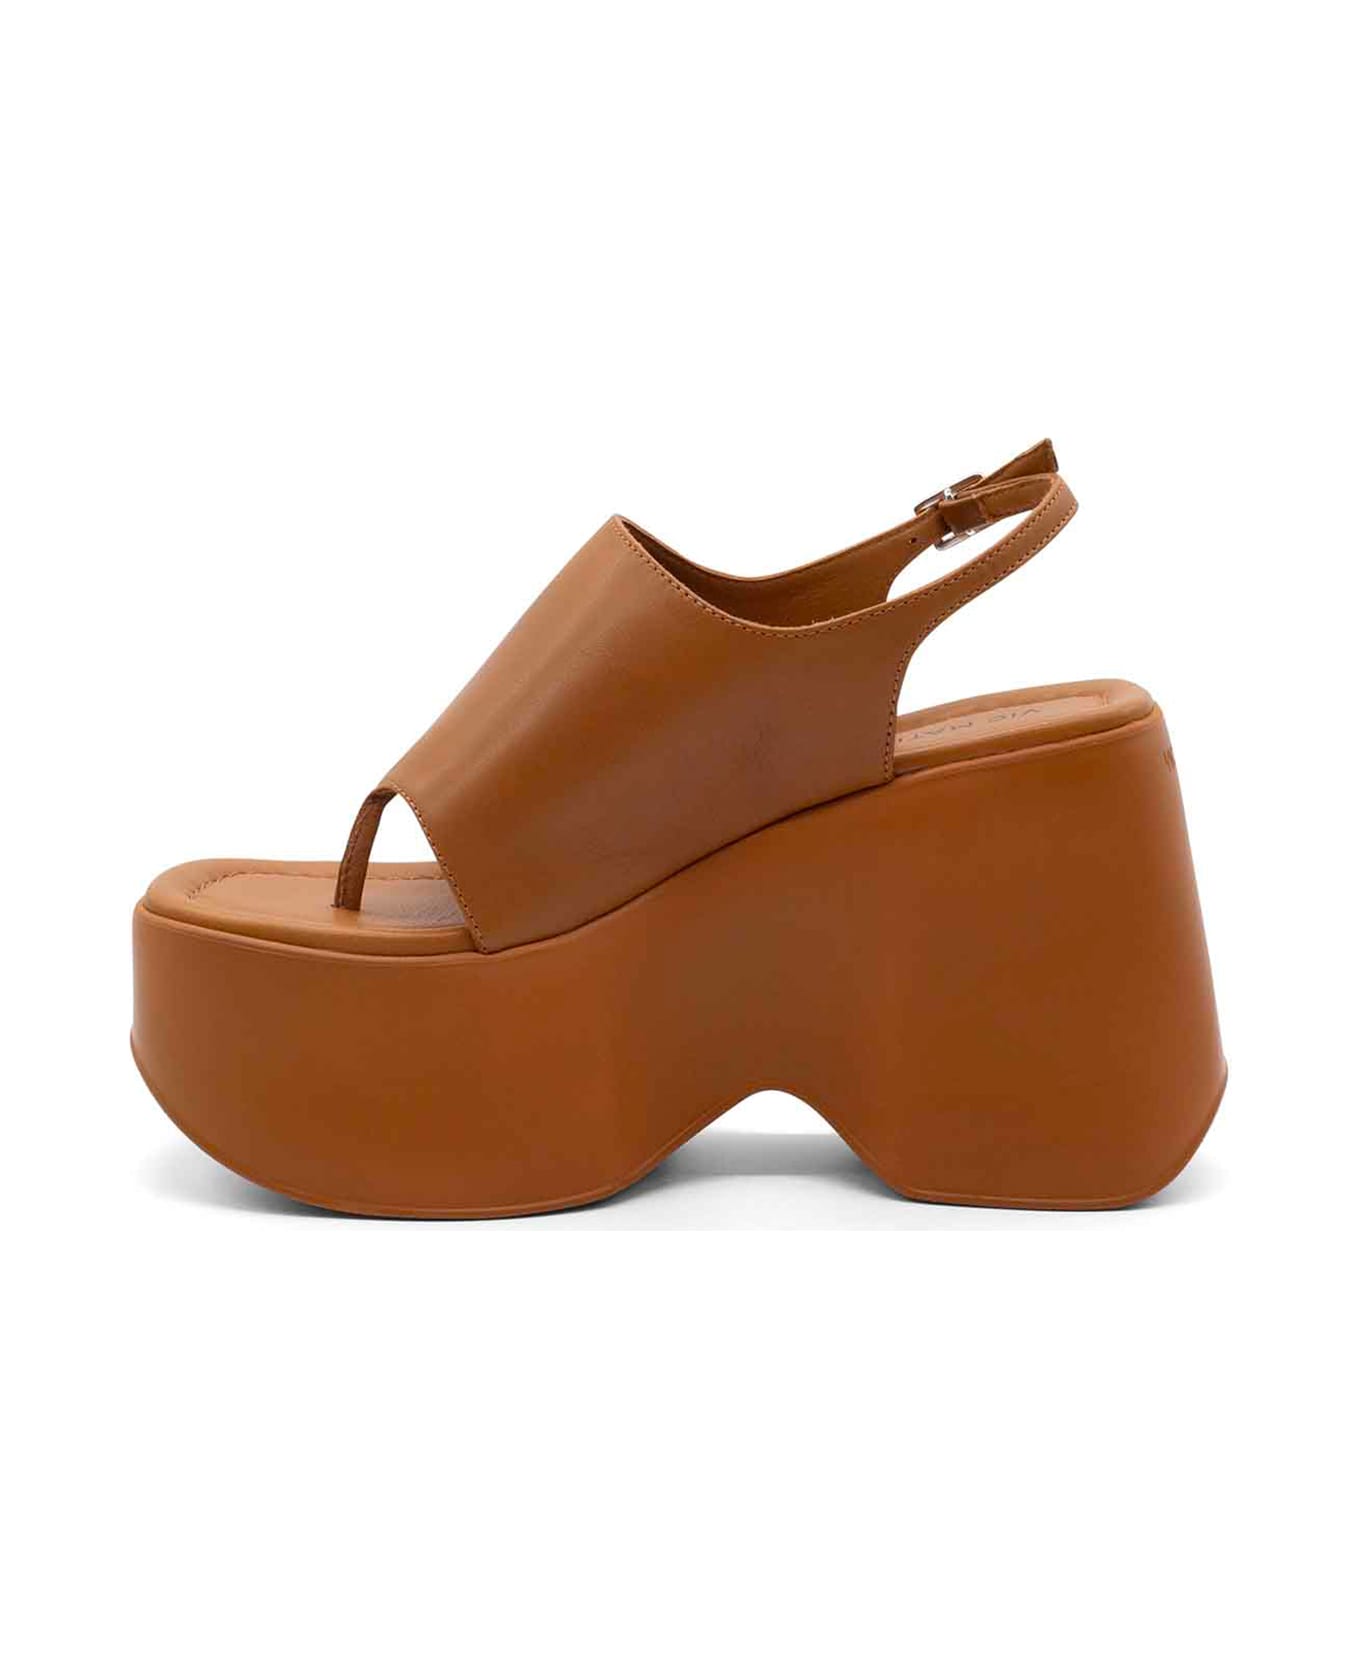 Vic Matié Tobacco Leather Flip-flops With Wedge - TOBACCO